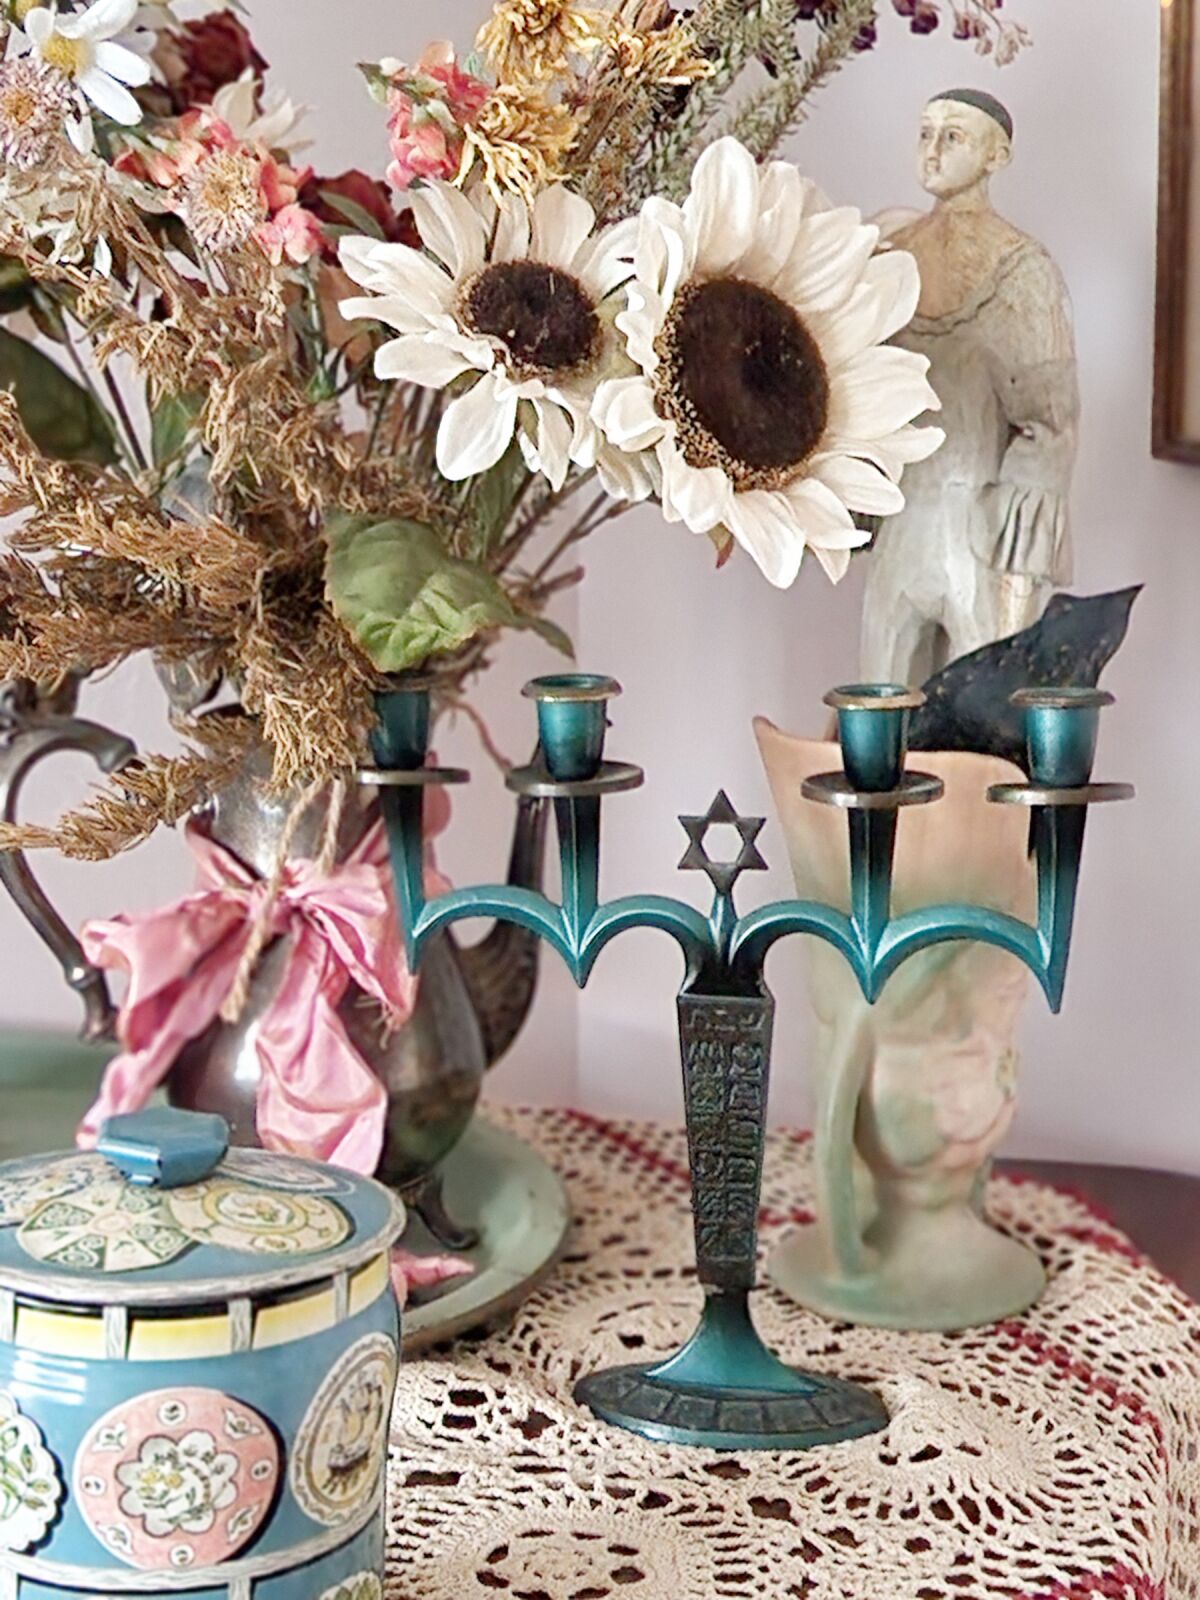 A vintage menorah joins other antique finds by Sheree Perelman in preparation for Hanukkah.